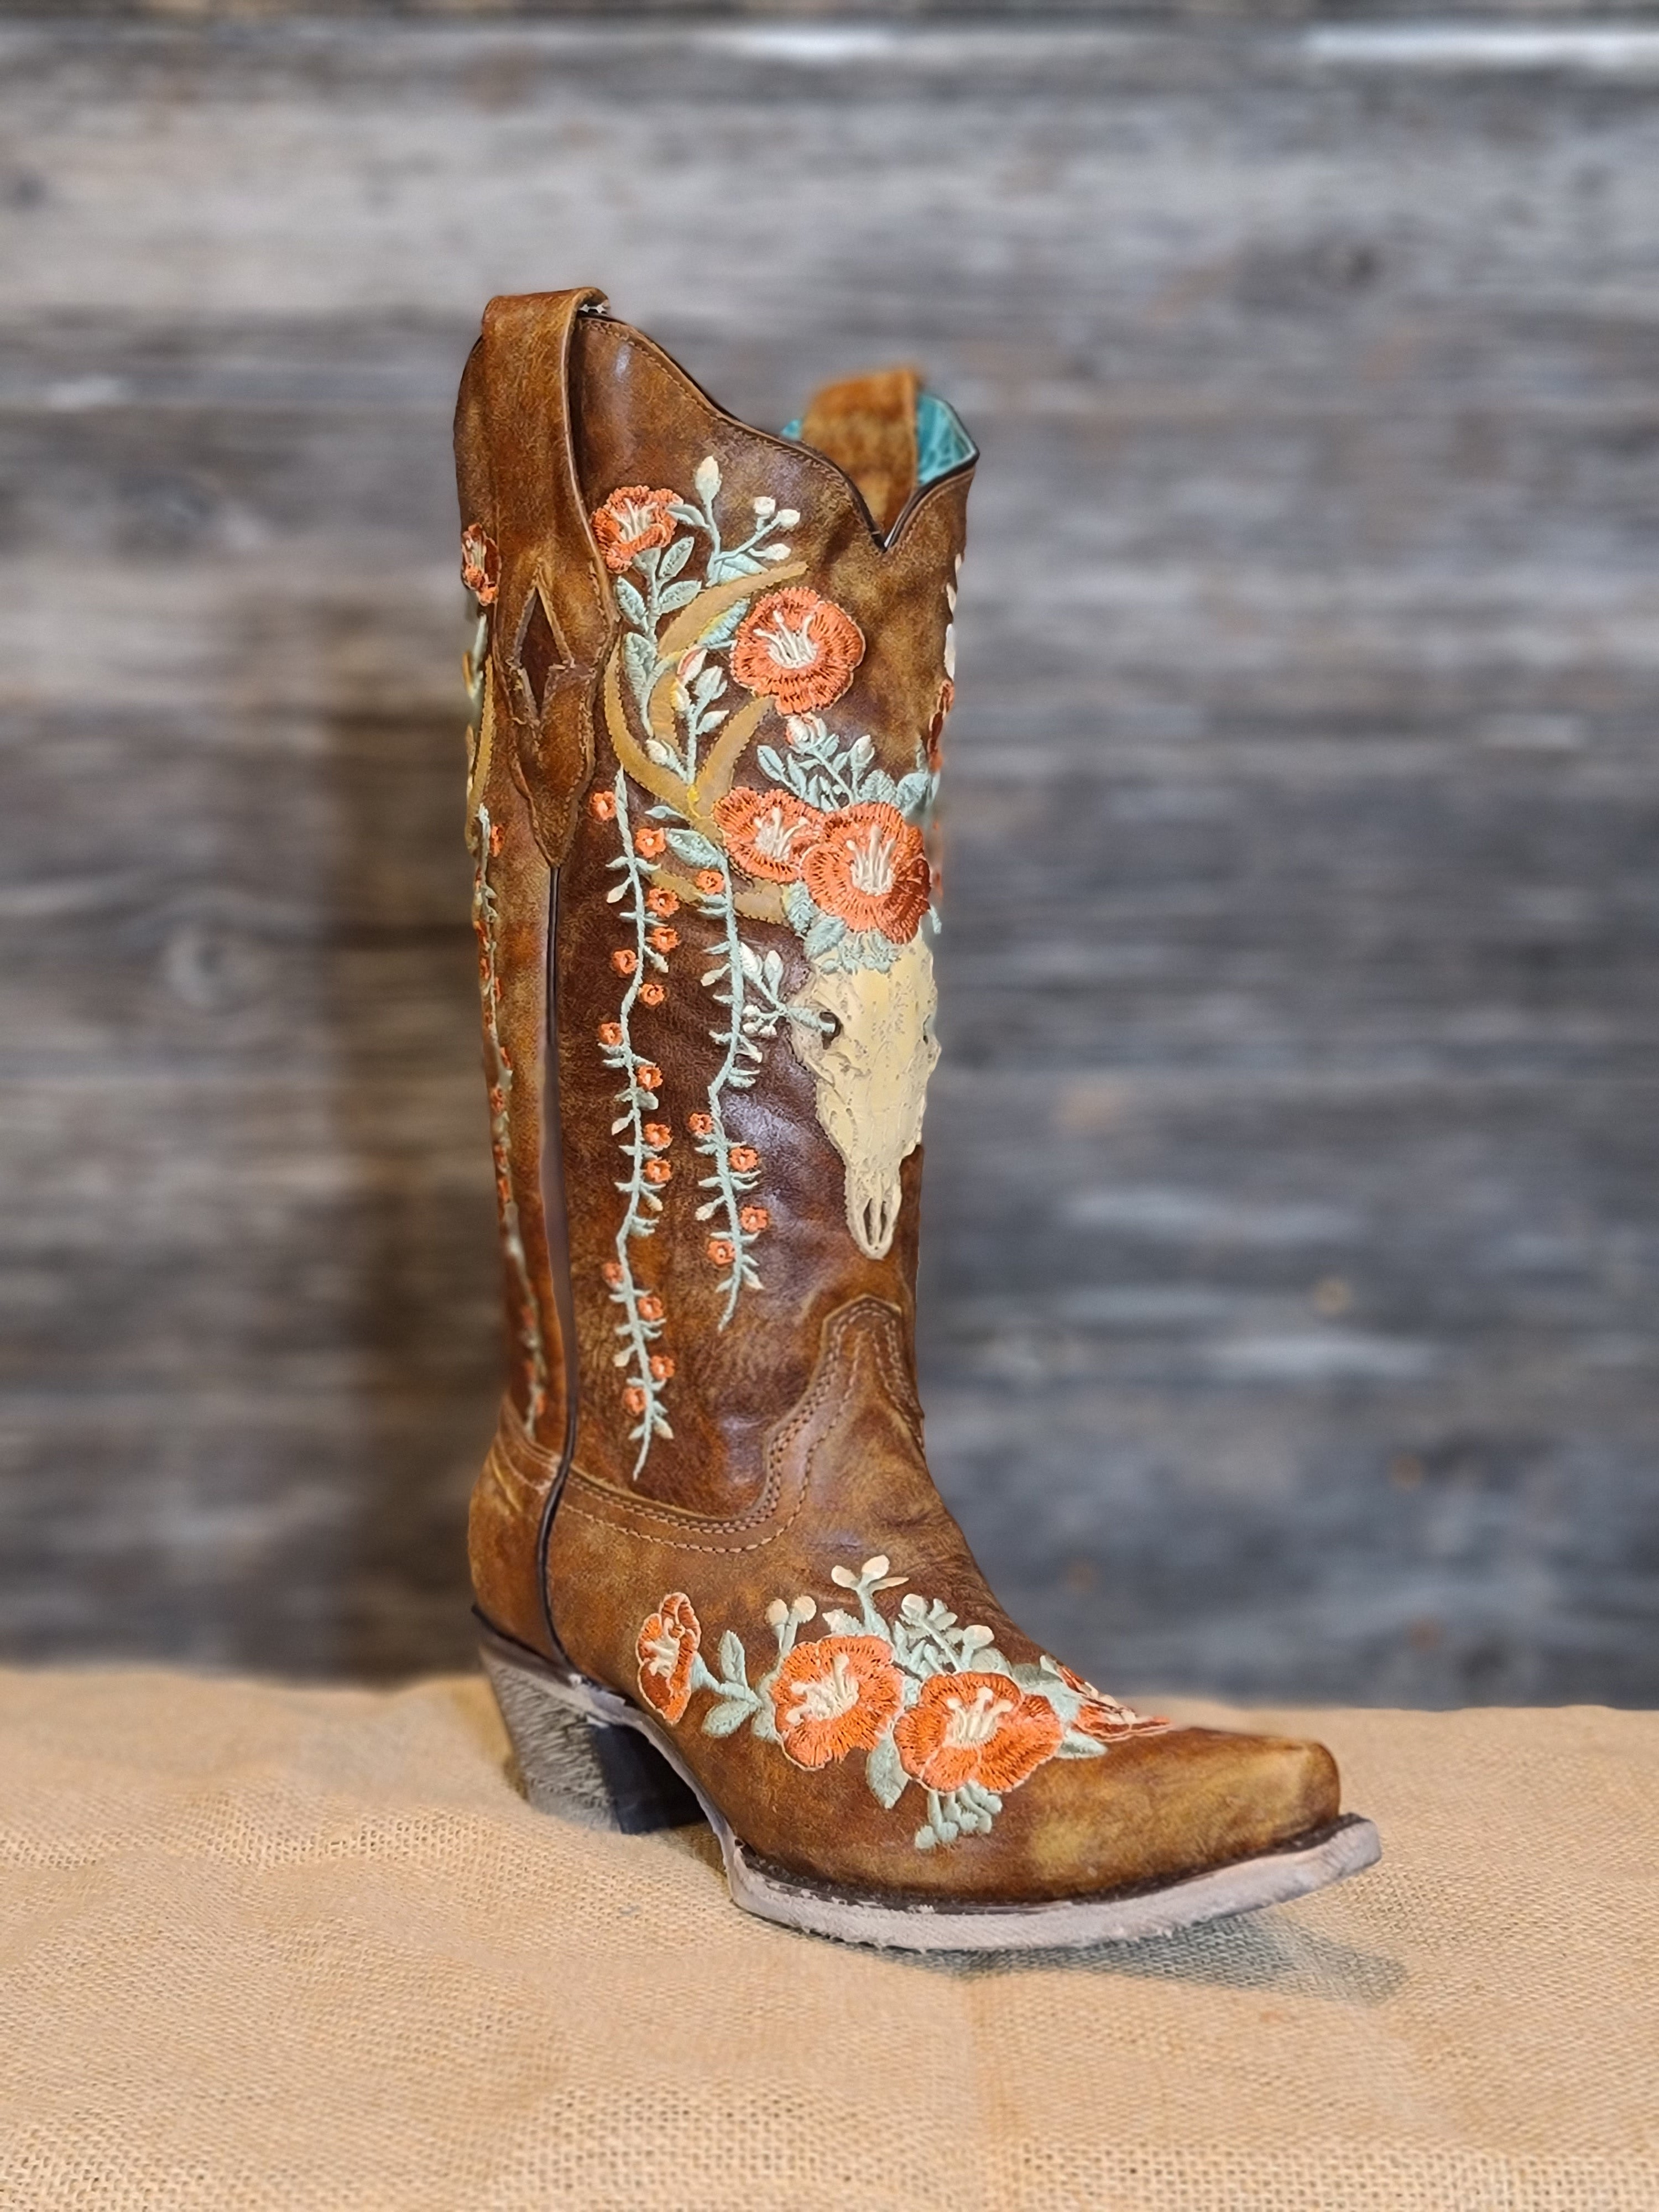 Corral A3652 Tan Deer Skull Overlay and Floral Embroidered Boots